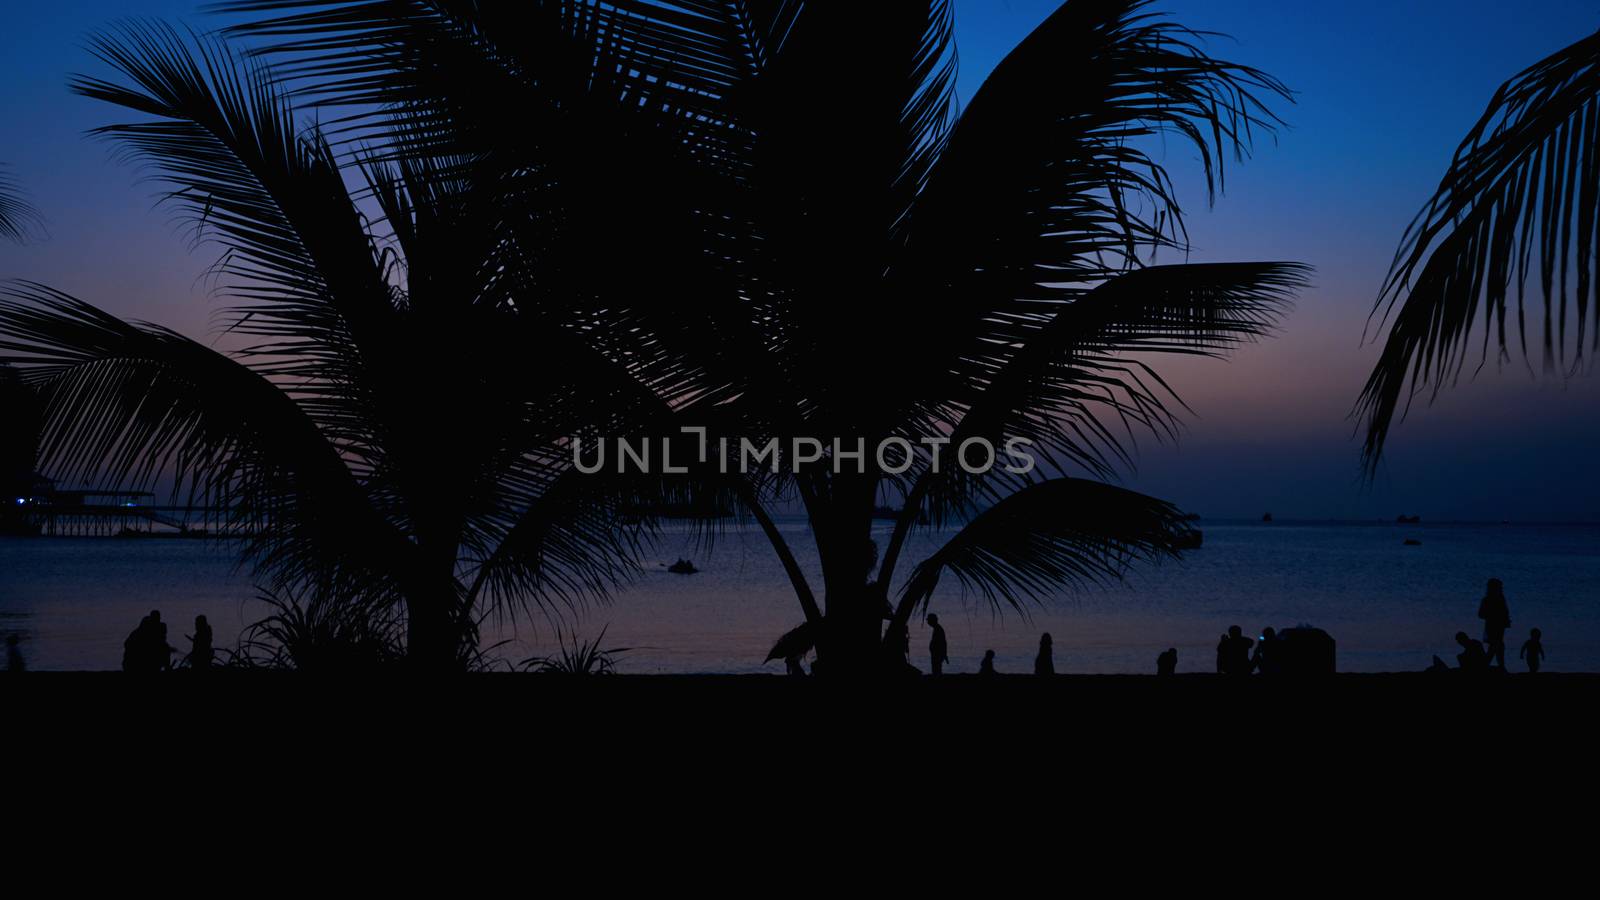 Silhouette of people on tropical beach at sunset - Tourists enjoying time in summer vacation - Travel, holidays and landscape concept - Focus on palm tree - blue color